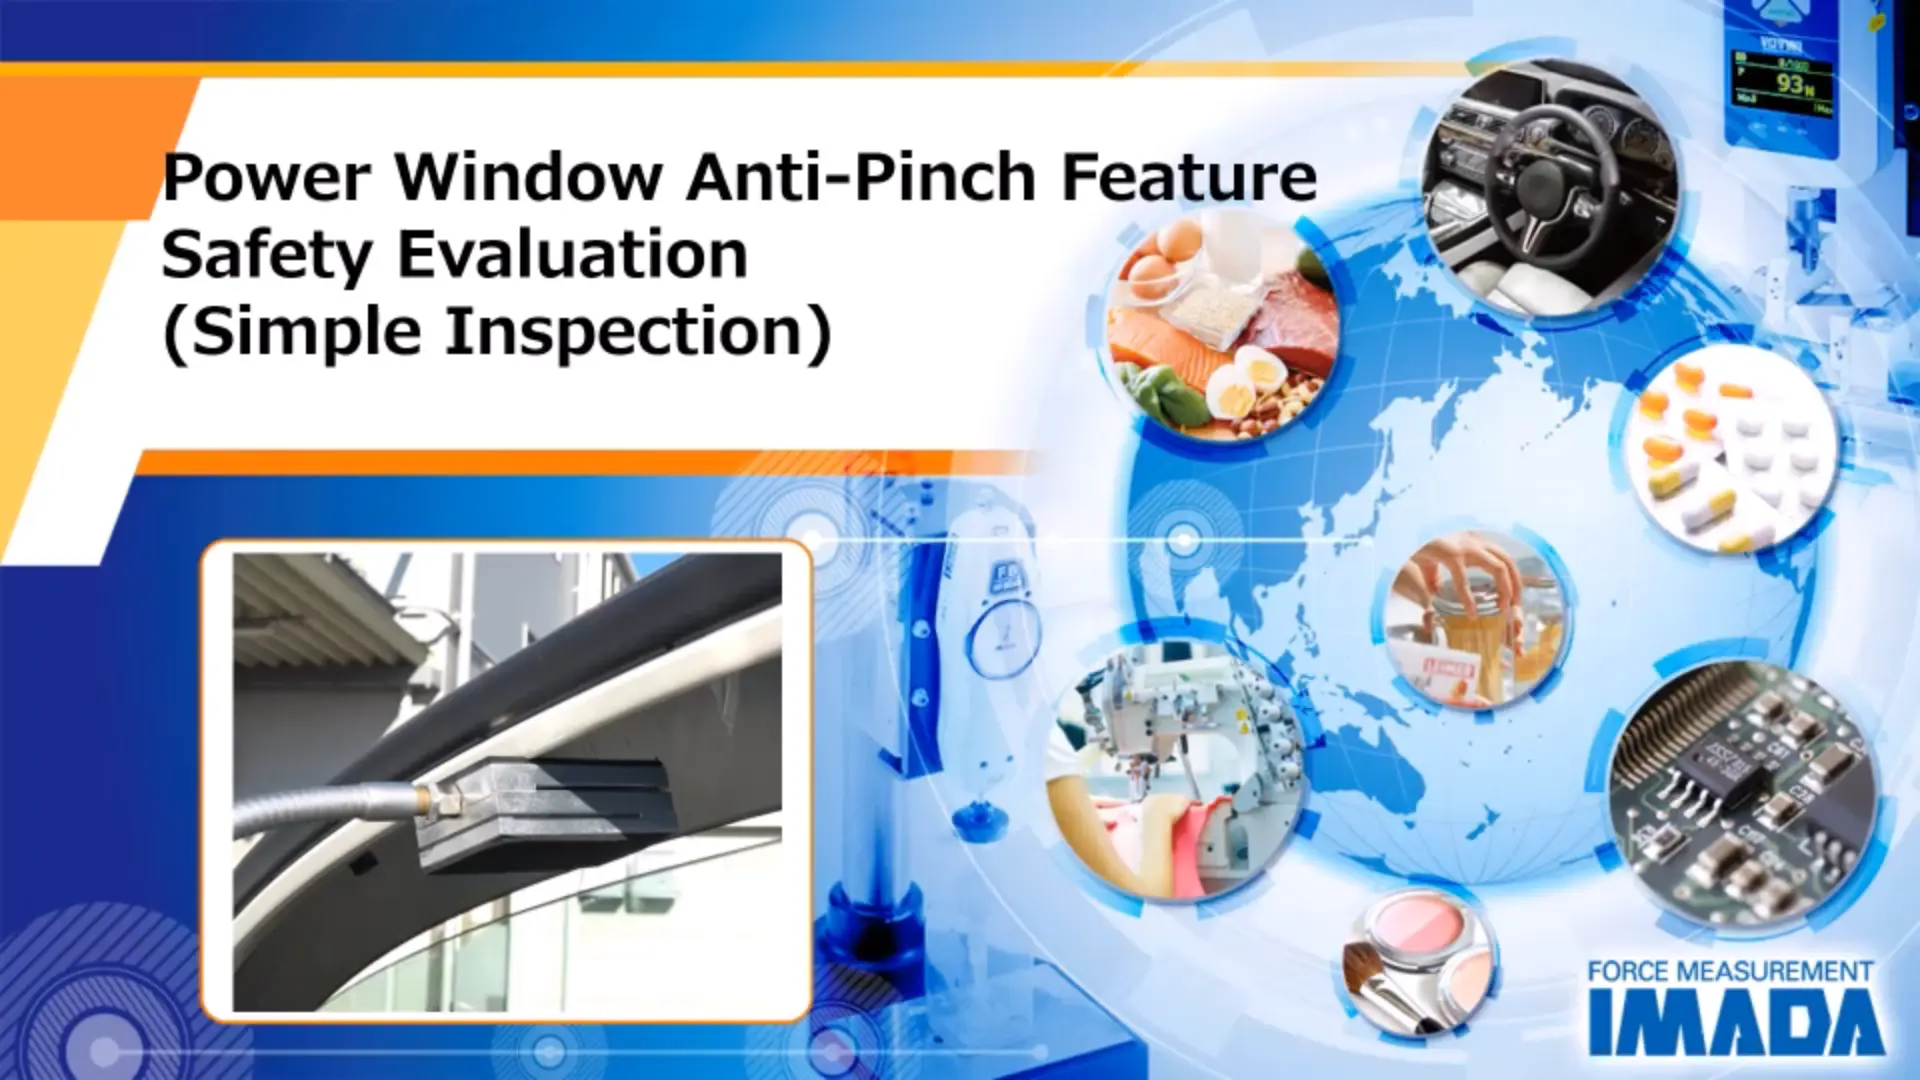 Safety Evaluation of Power Window's Anti-Pinch Function (Simple Inspection)